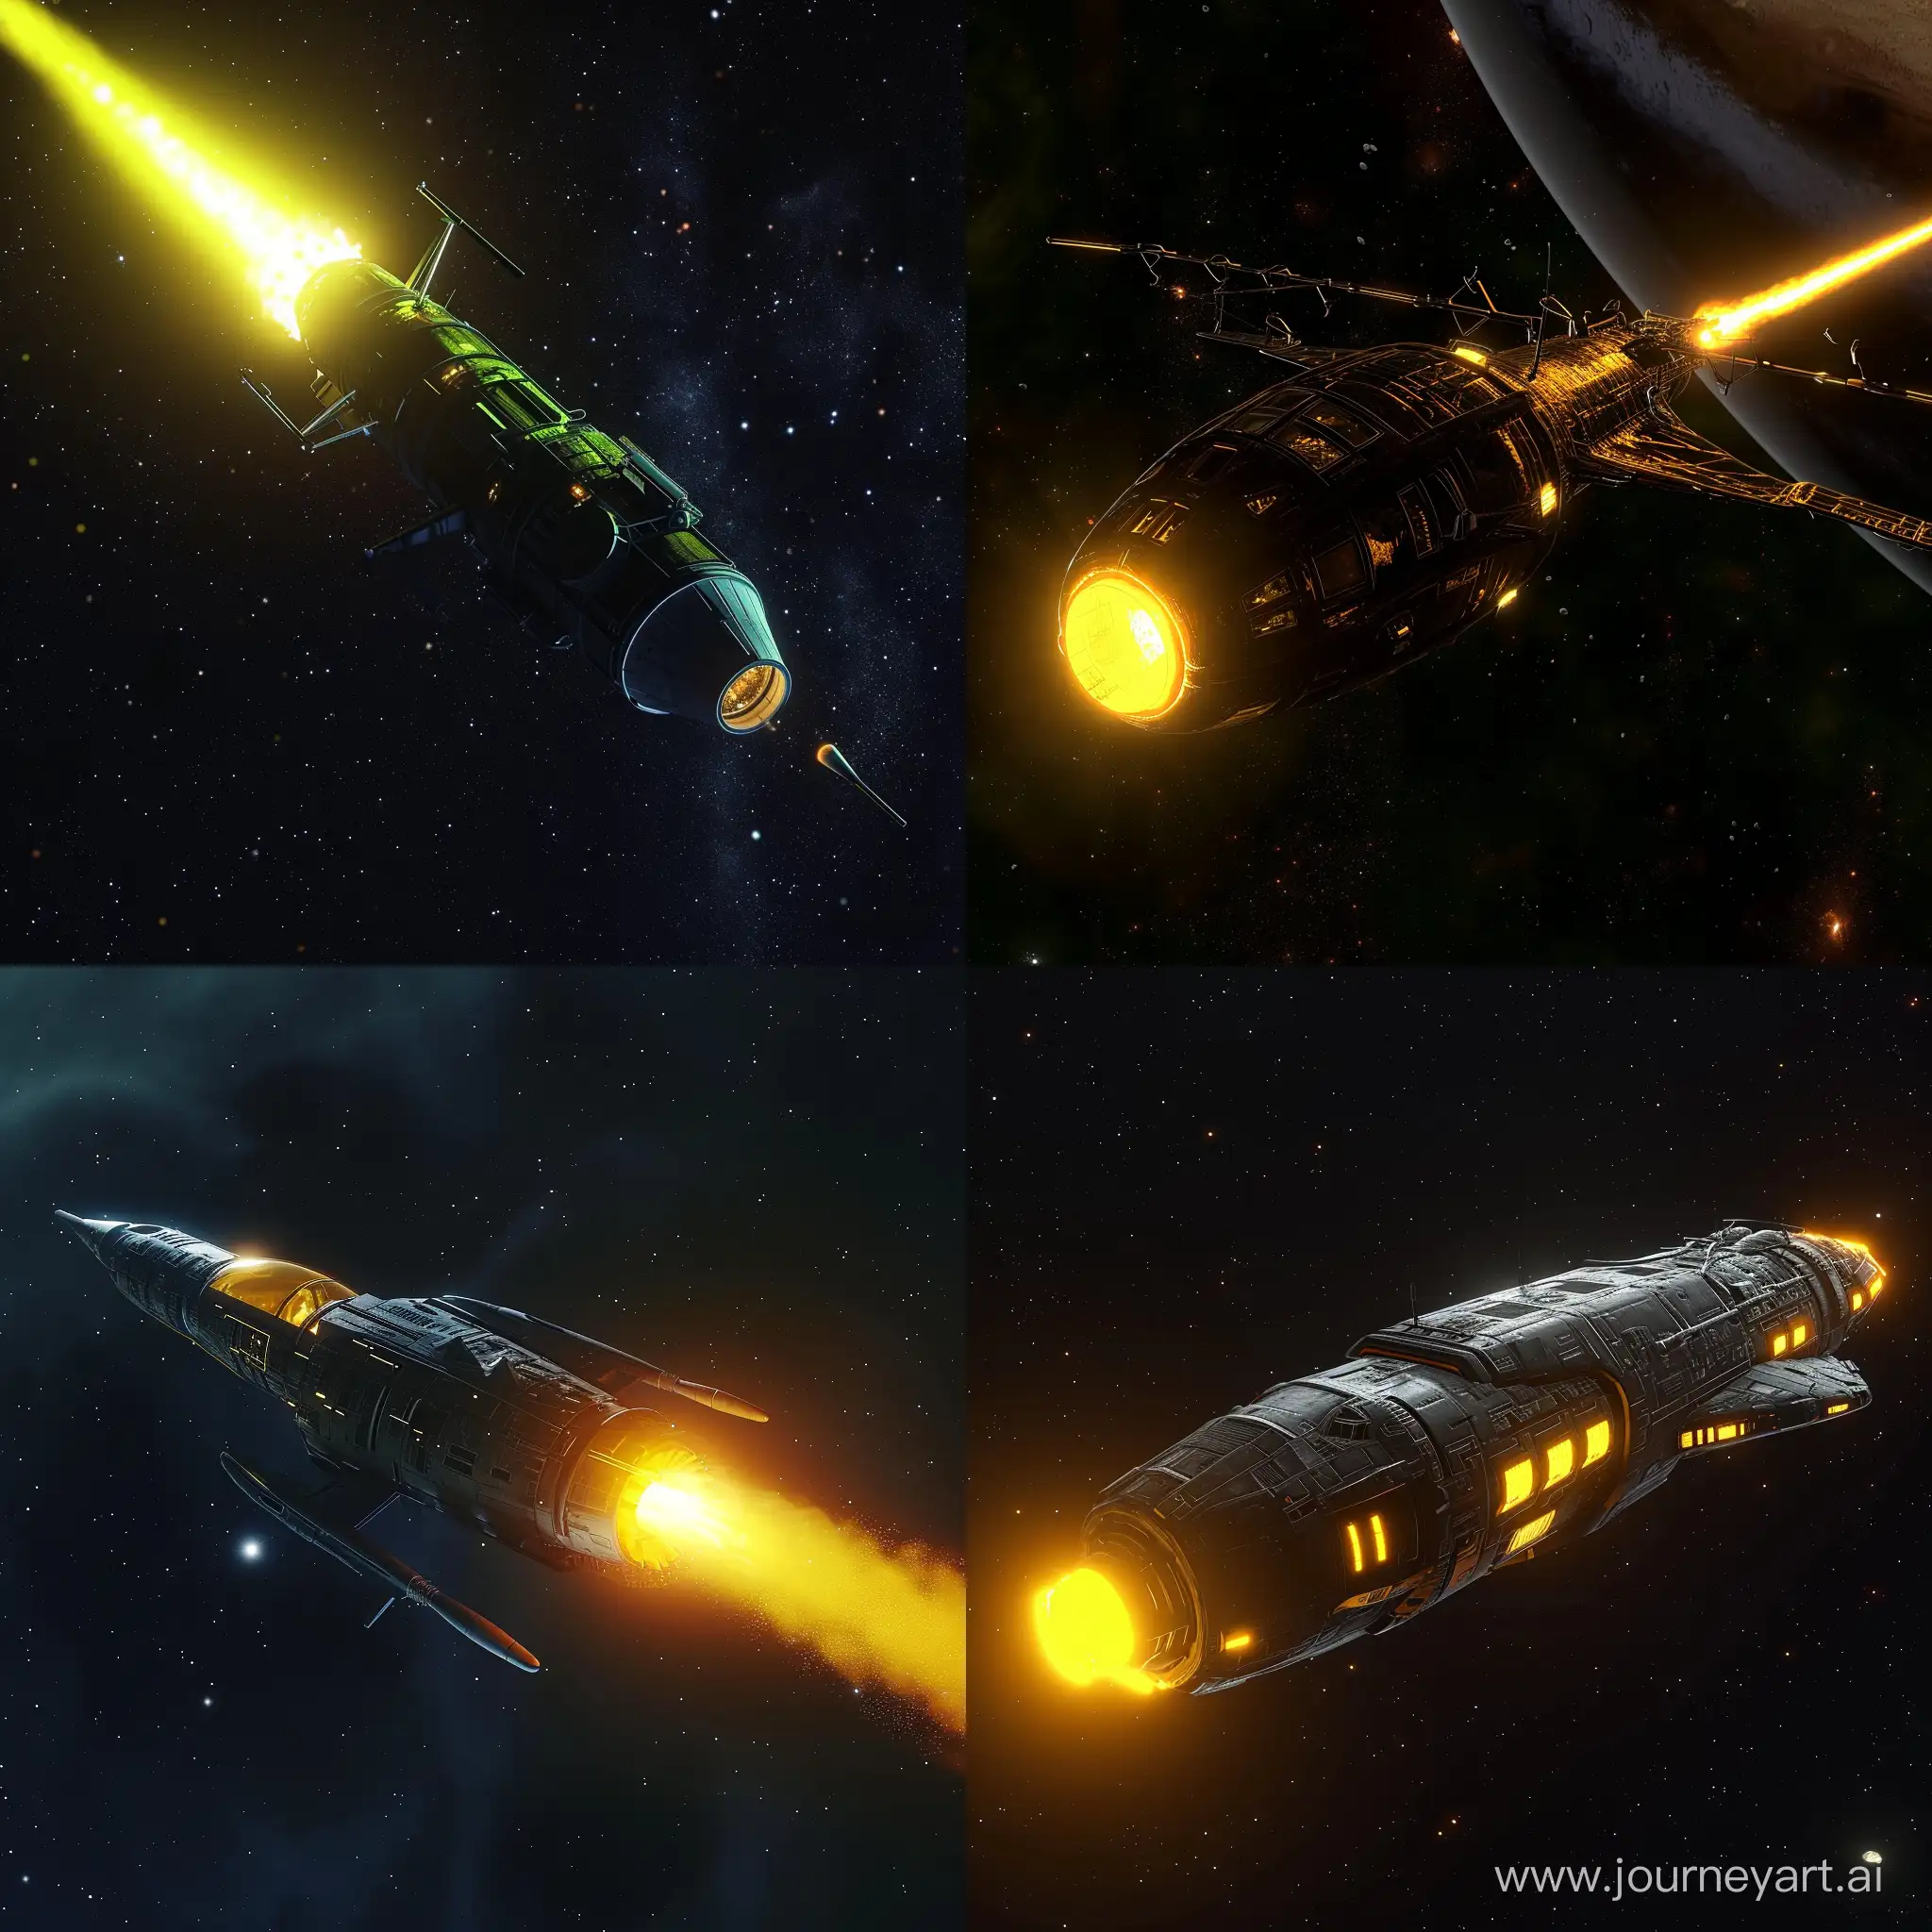 Probe spaceship glowing yellow in space